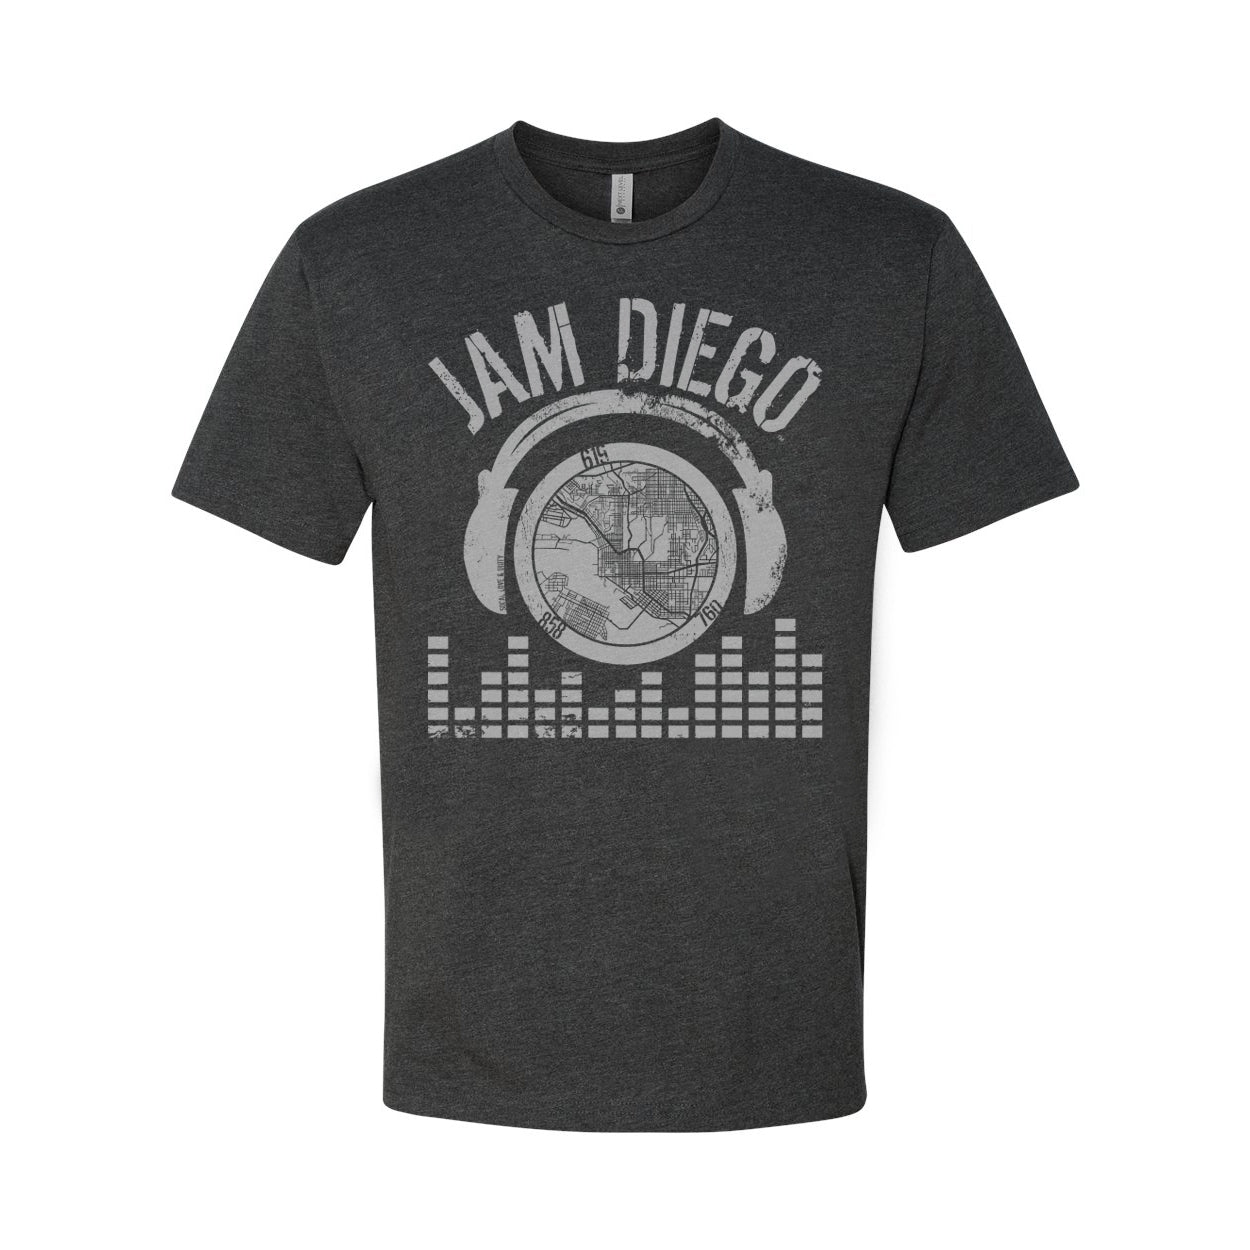 Charcoal Gray with Washed Out "Jam Diego" Design T-Shirt